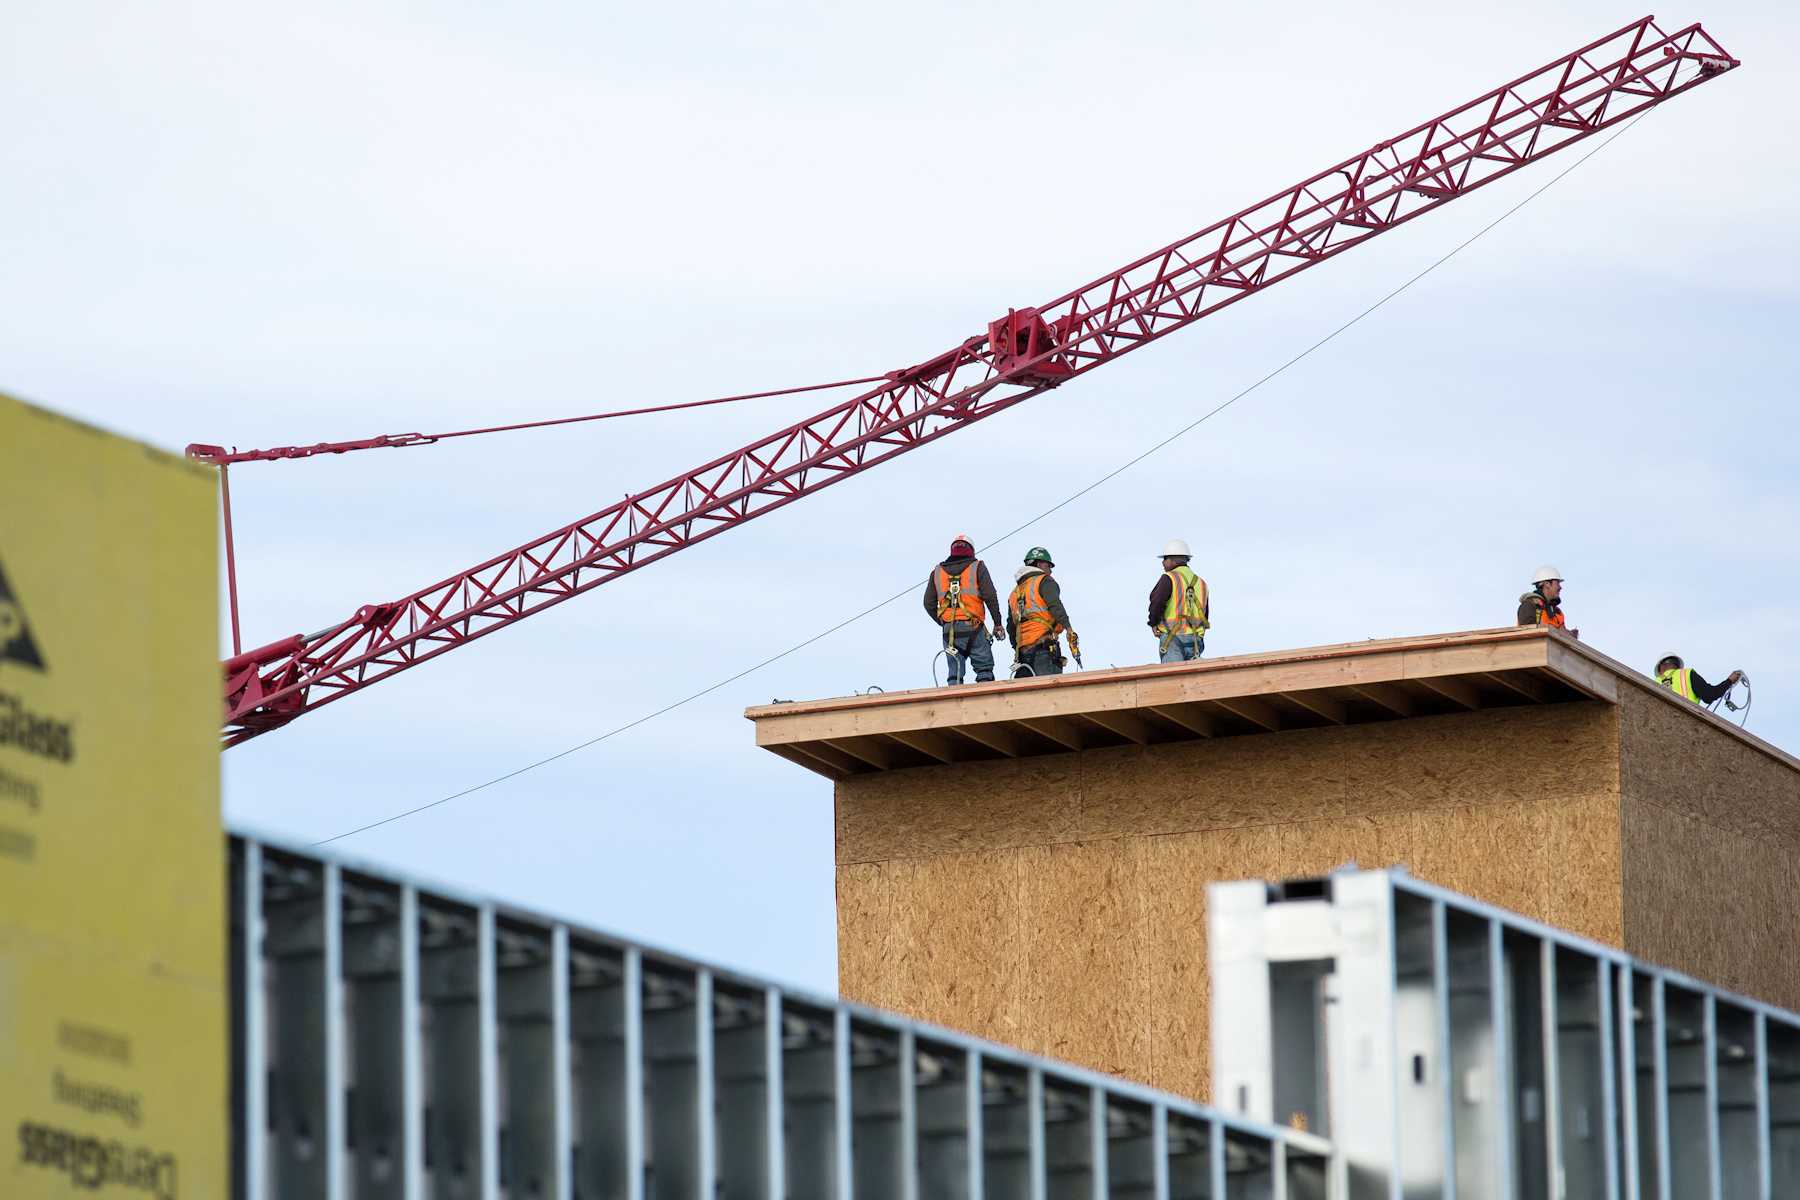 A constuction crew works on the roof of the new student apartment complex, The Summit, on the corner of College Ave. and Prospect St. The complex is expected to be completed in summer of 2012 and is apart of a plan to increase the student housing in Fort Collins.